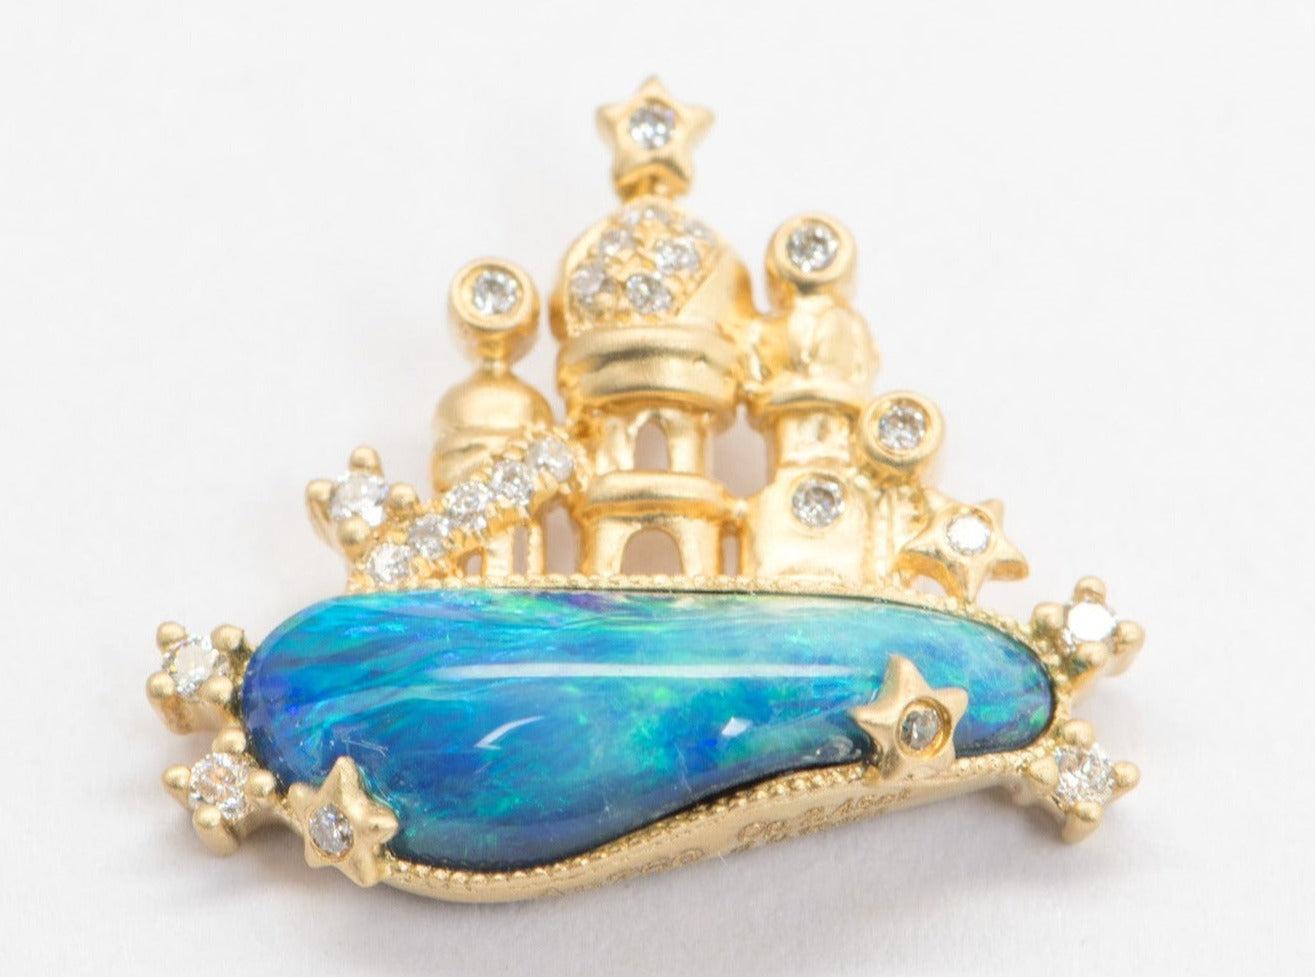 ♥ Solid 18k yellow gold castle pendant set with a beautiful doublet Australian Opal and diamonds
♥ Gorgeous blue color!
♥ The item measures 17 mm in length, 18.8 mm in width, and is 5.3 mm thick

♥ Gemstone: Opal, 2.45t; diamond, 0.132ct
♥ All